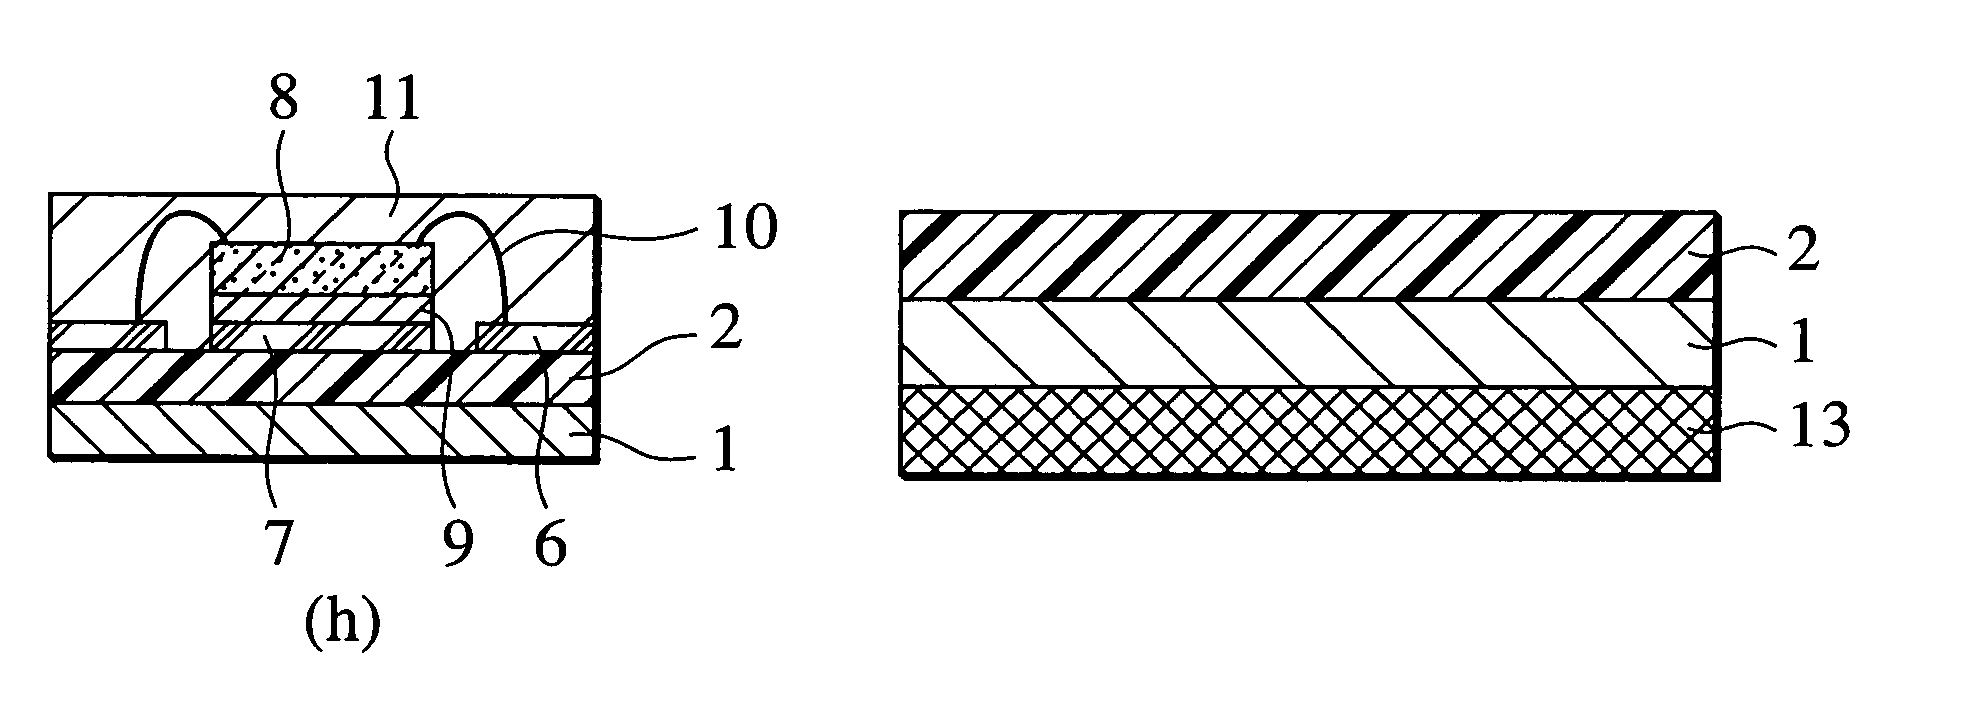 Adhesive film for semiconductor, metal sheet with such adhesive film, wiring substrate with adhesive film, semiconductor device, and method for manufacturing semiconductor device